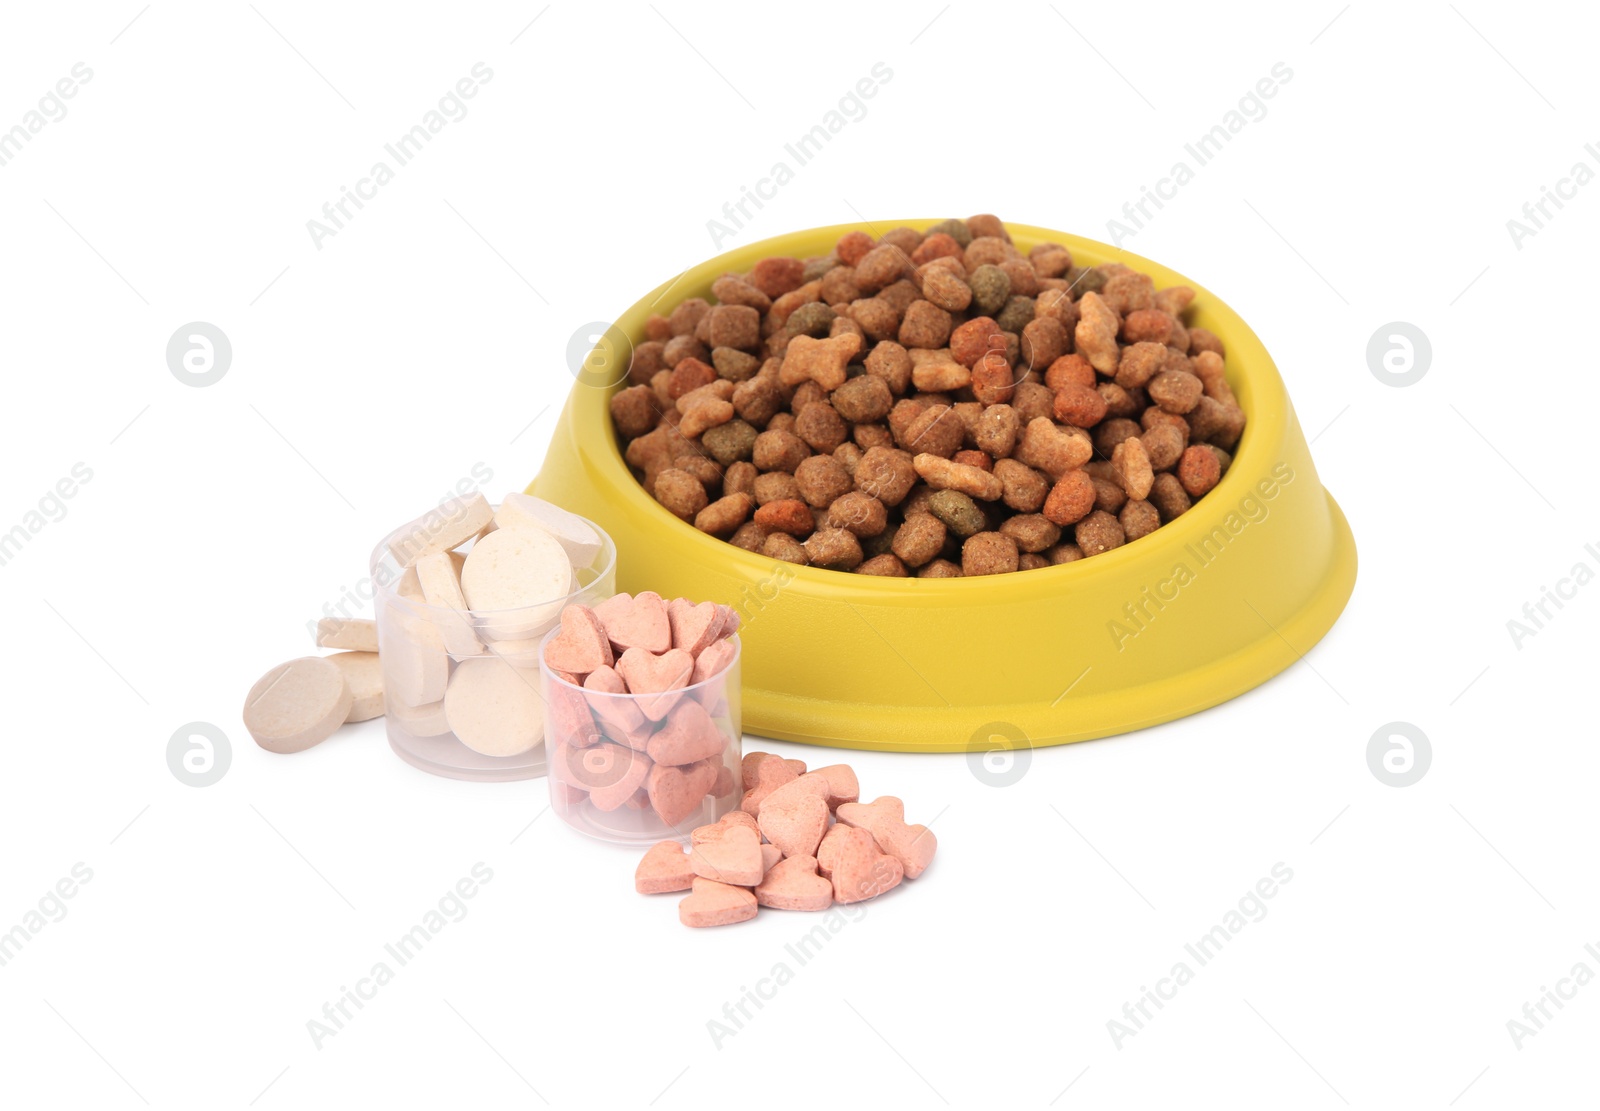 Photo of Dry pet food in bowl and vitamins isolated on white